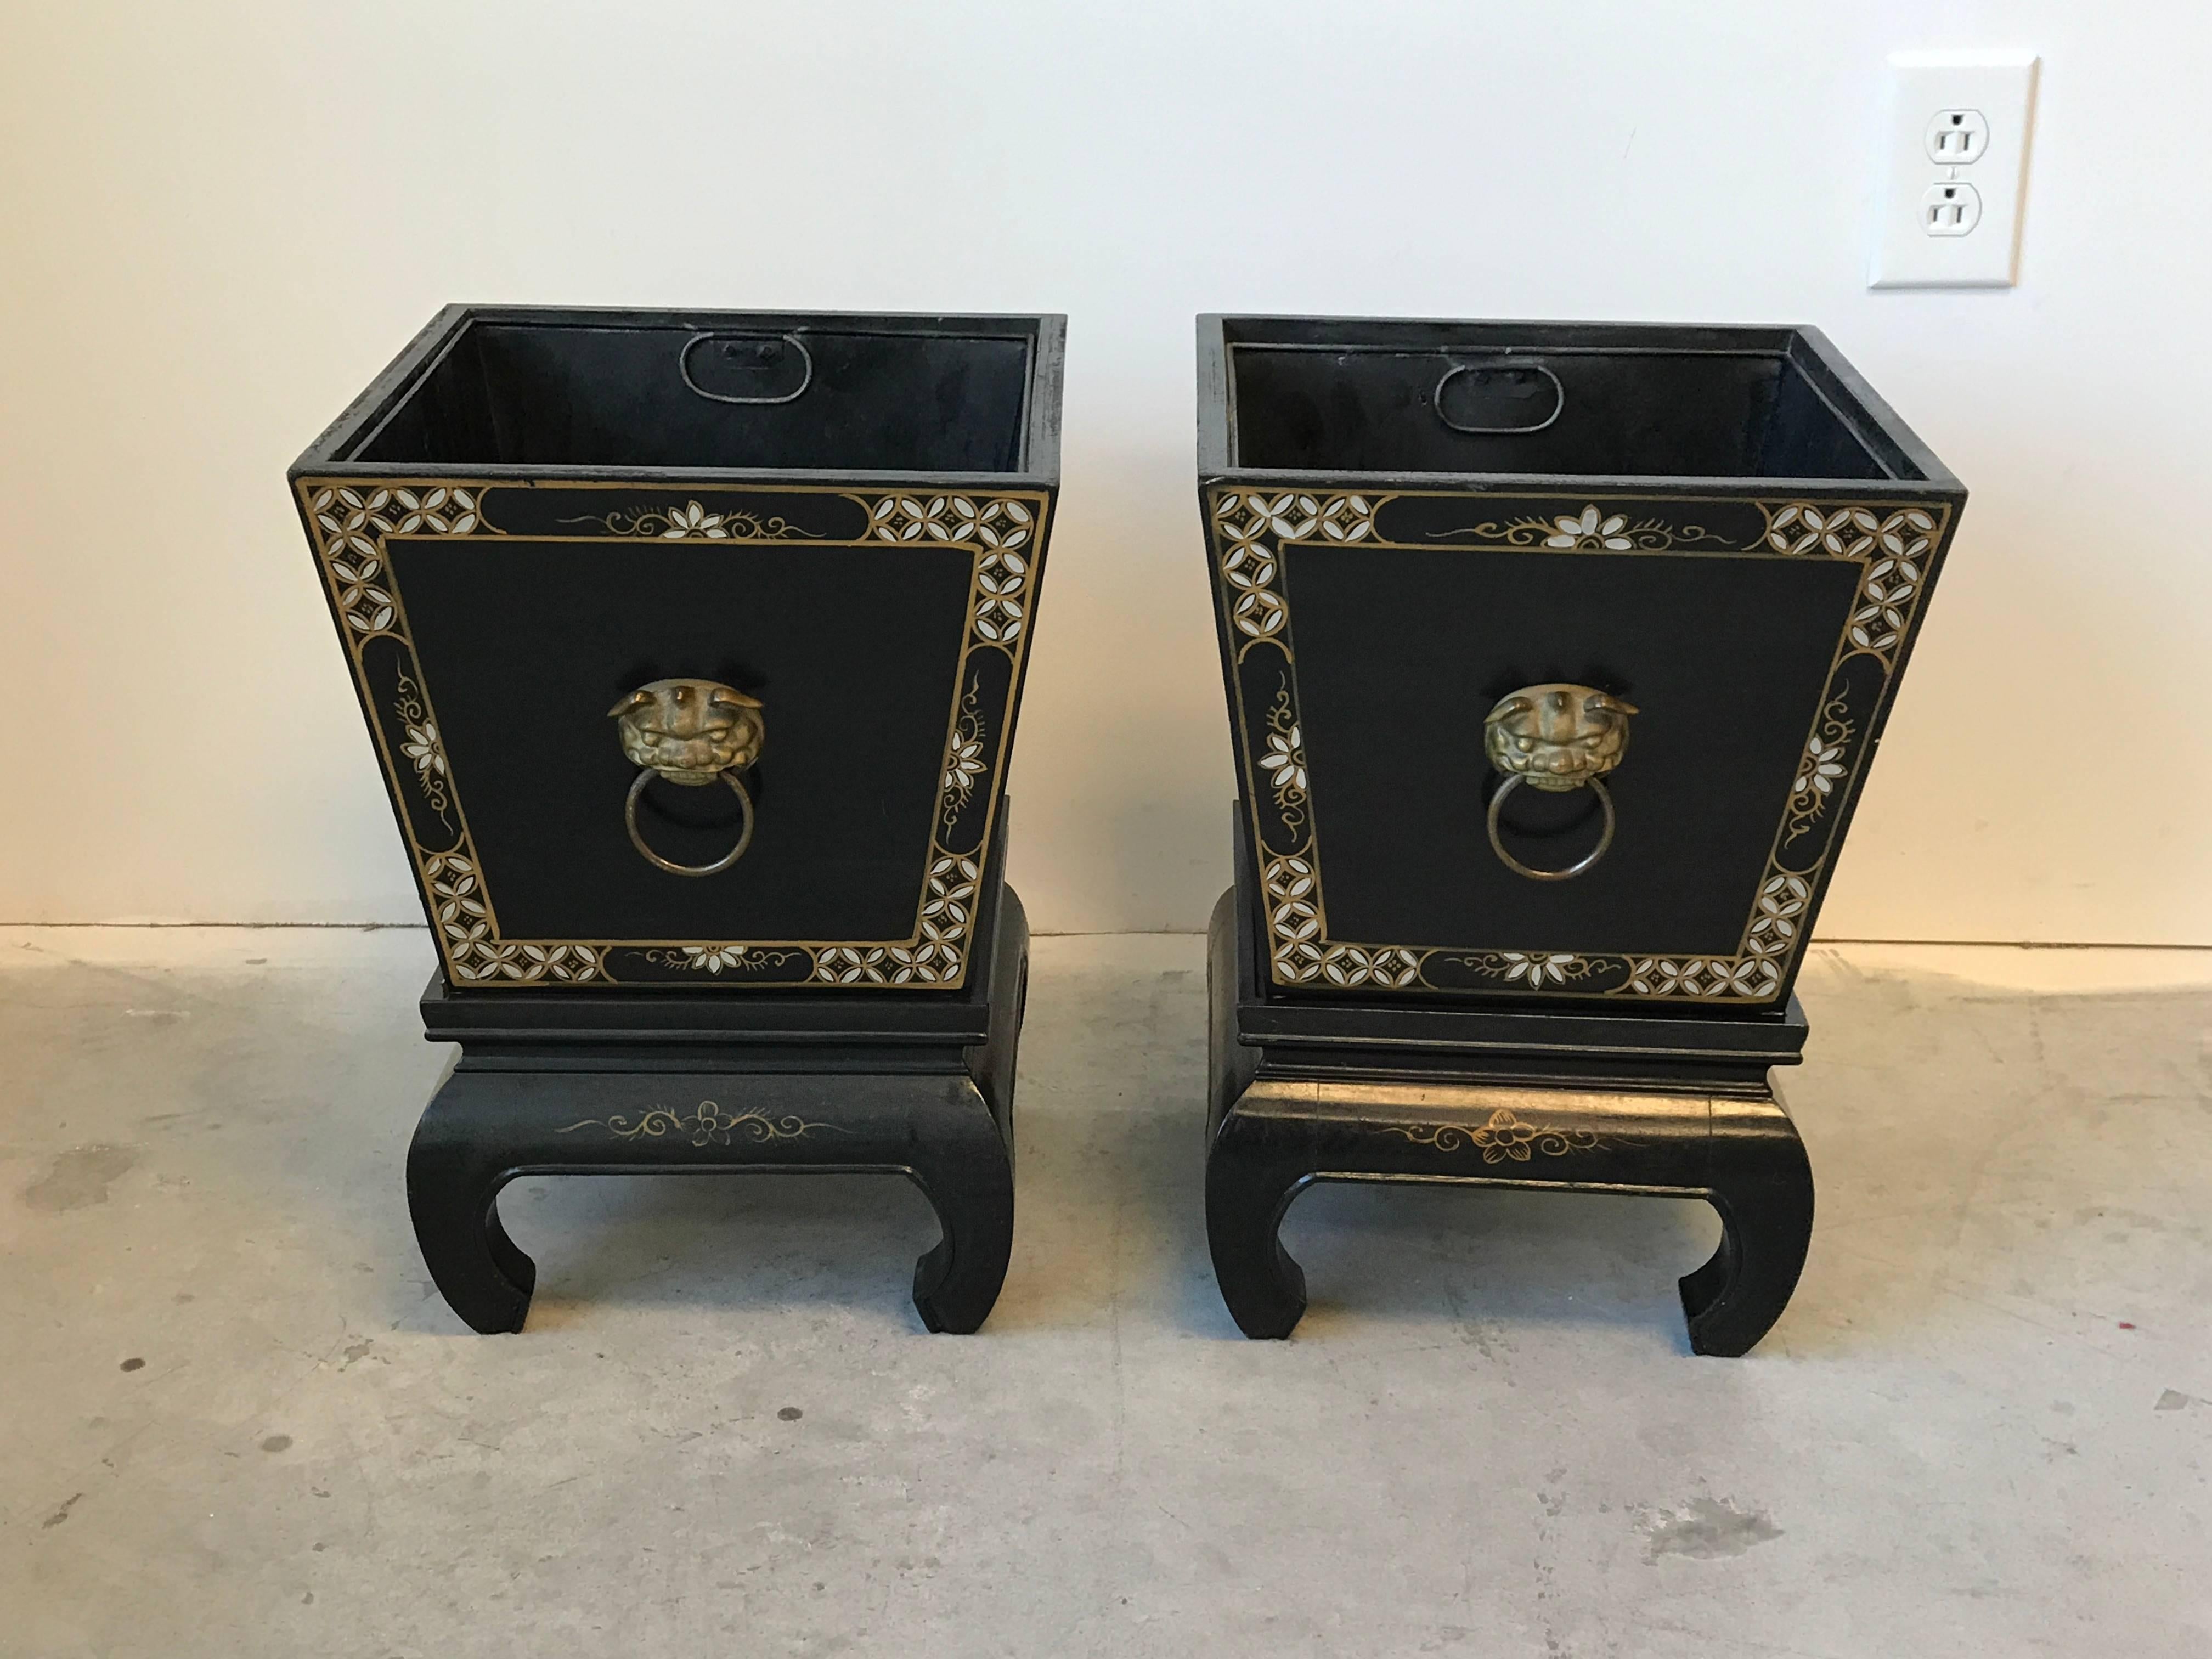 Stone 1960s Black and Gold Asian Planters on Stands with Brass Foo Dog Handles, Pair